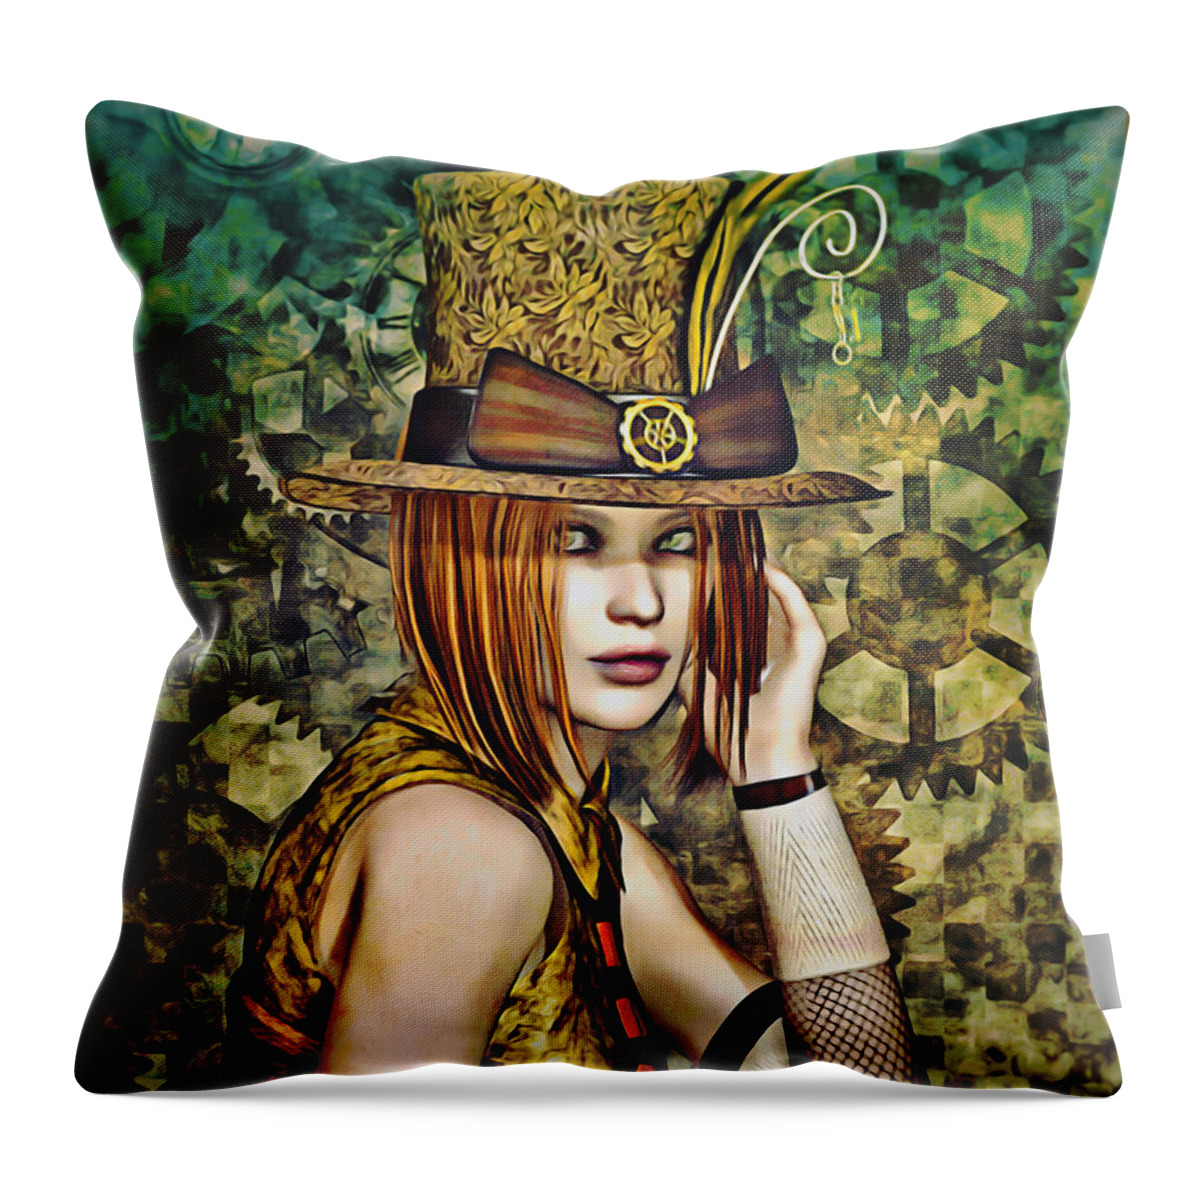 Steampunk Throw Pillow featuring the digital art Steampunk Girl Two by Alicia Hollinger